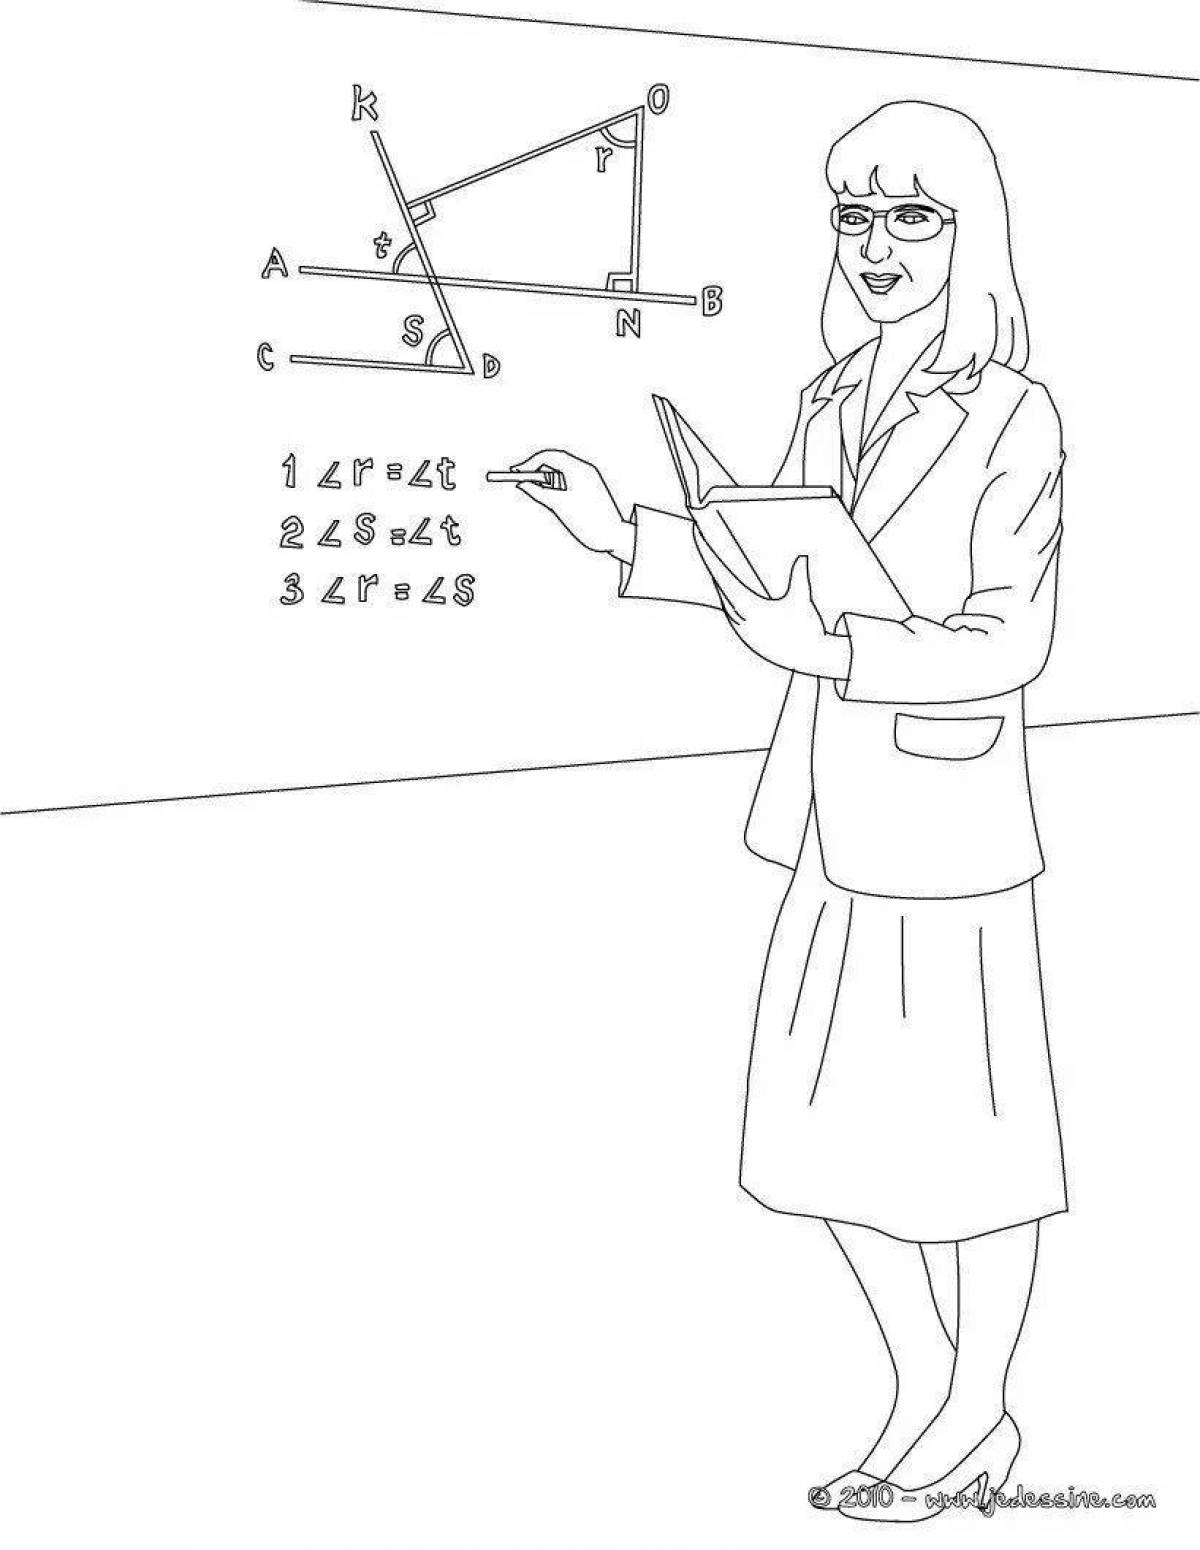 Passionate teacher coloring page